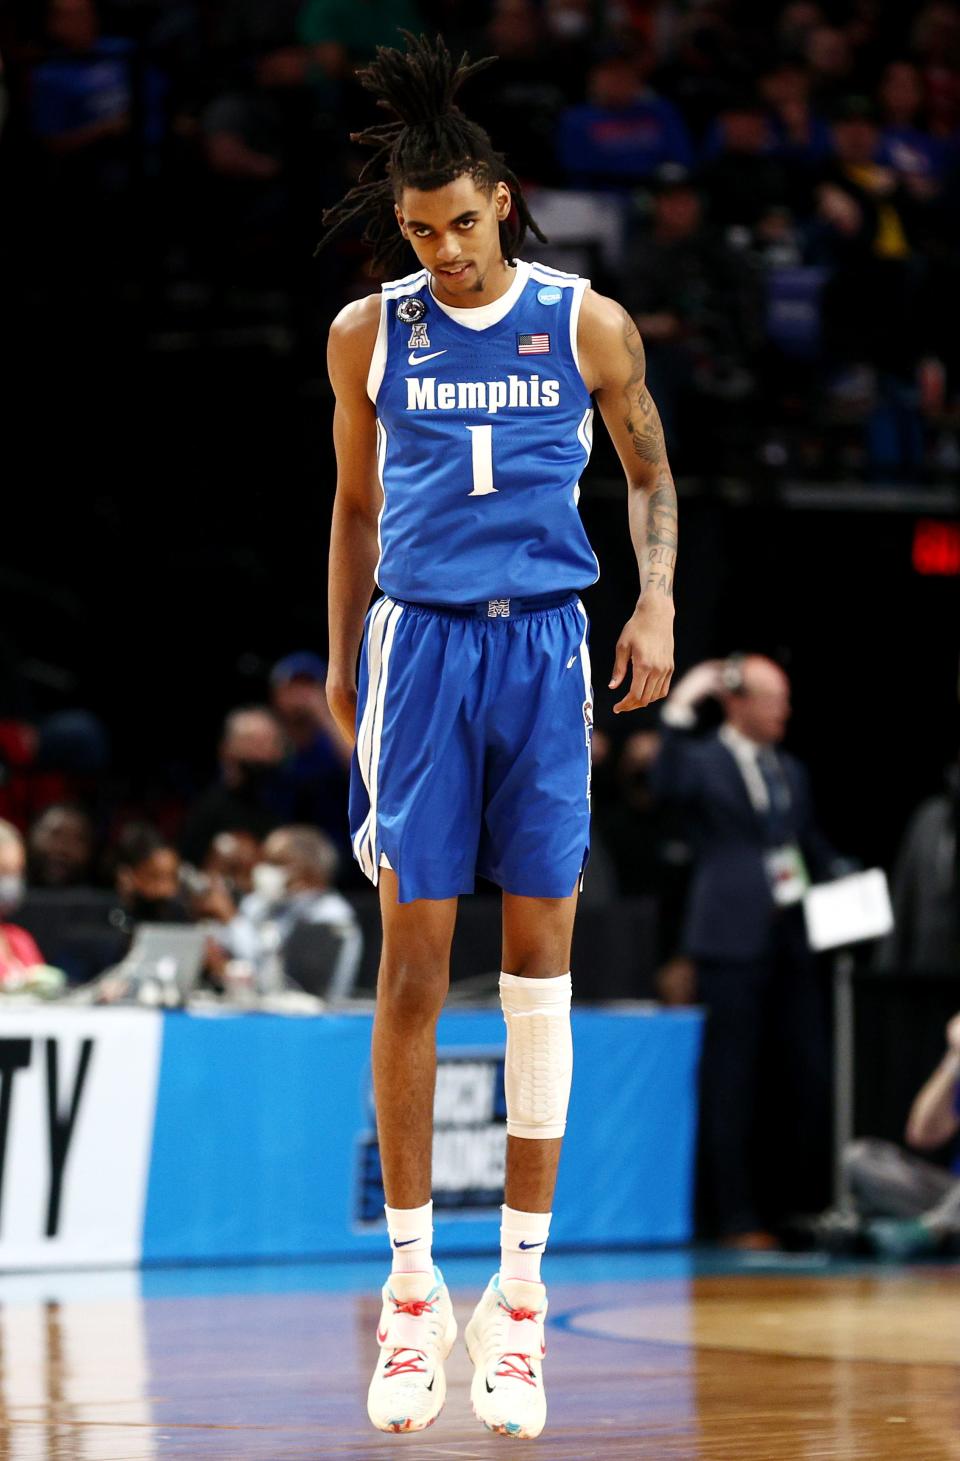 PORTLAND, OREGON - MARCH 17: Emoni Bates #1 of the Memphis Tigers reacts after making a basket during the first half against the Boise State Broncos in the first round game of the 2022 NCAA Men's Basketball Tournament at Moda Center on March 17, 2022 in Portland, Oregon. (Photo by Ezra Shaw/Getty Images)